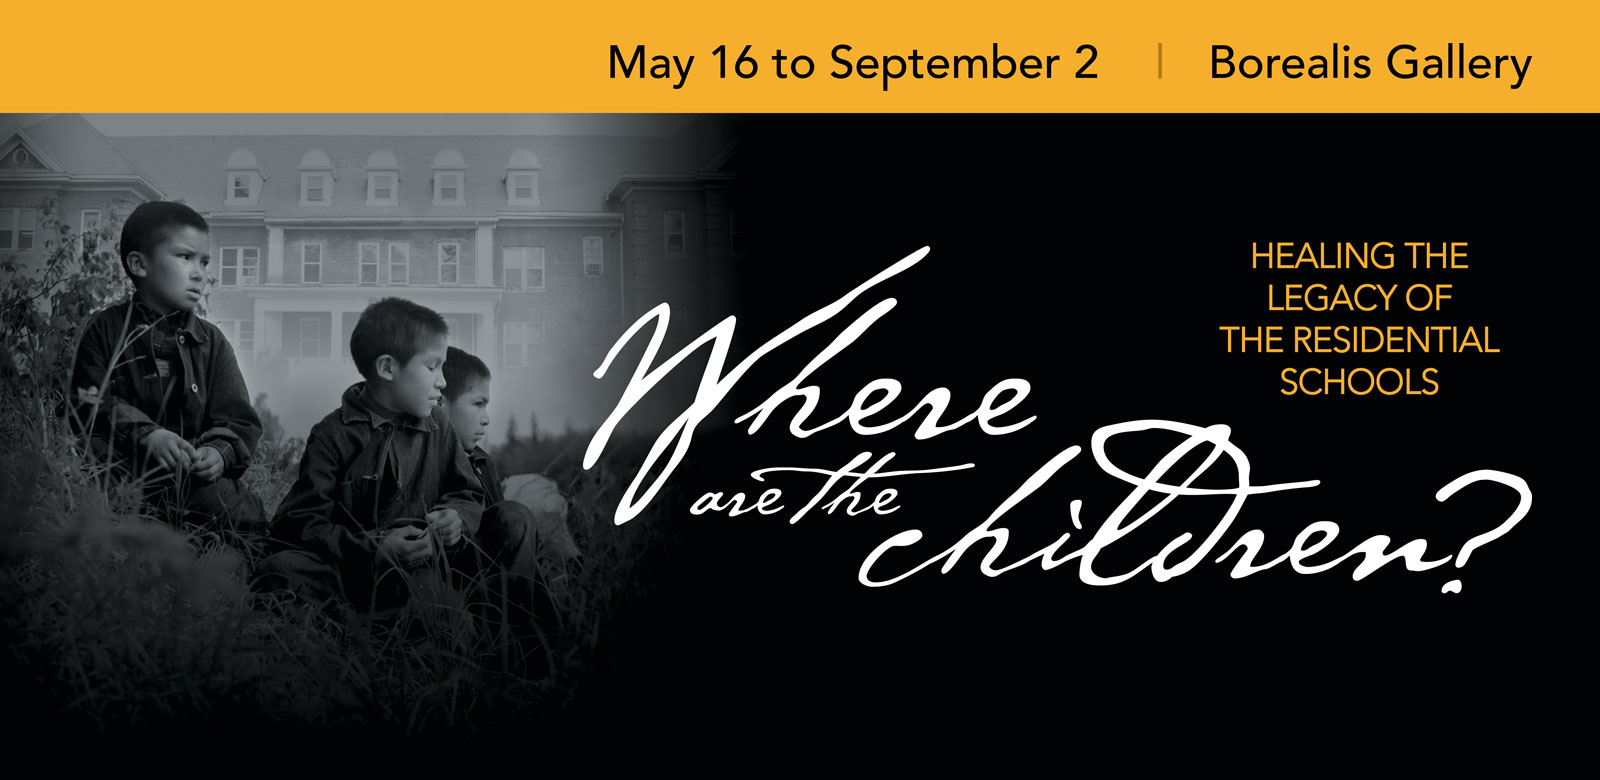 May 16 to September 2, 2019 - Where are the Children?